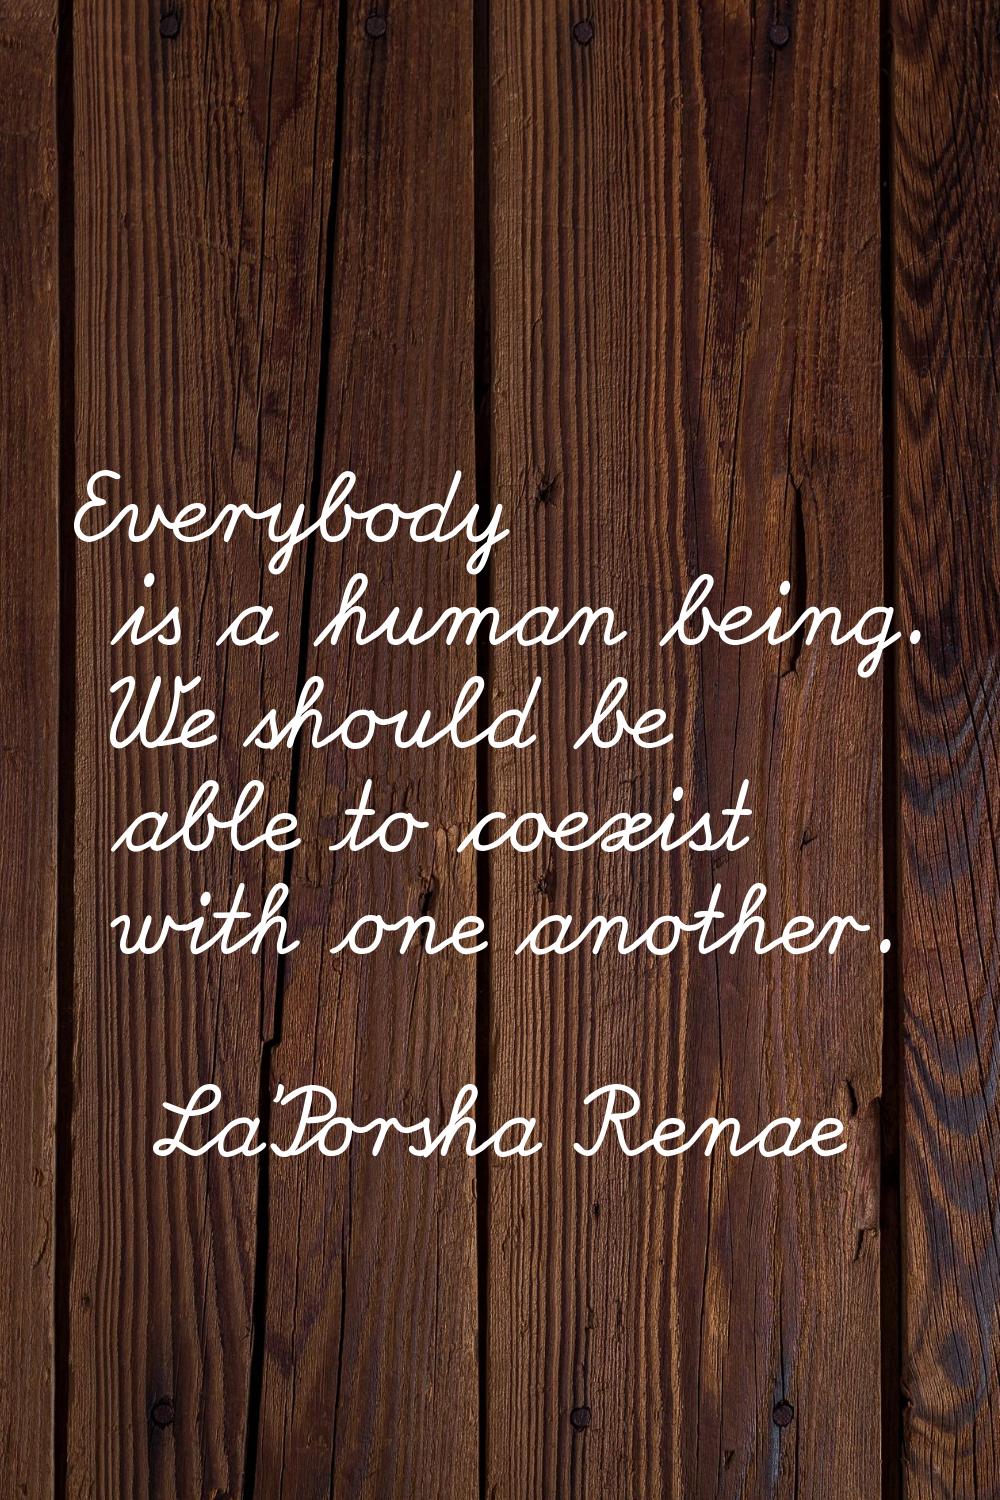 Everybody is a human being. We should be able to coexist with one another.